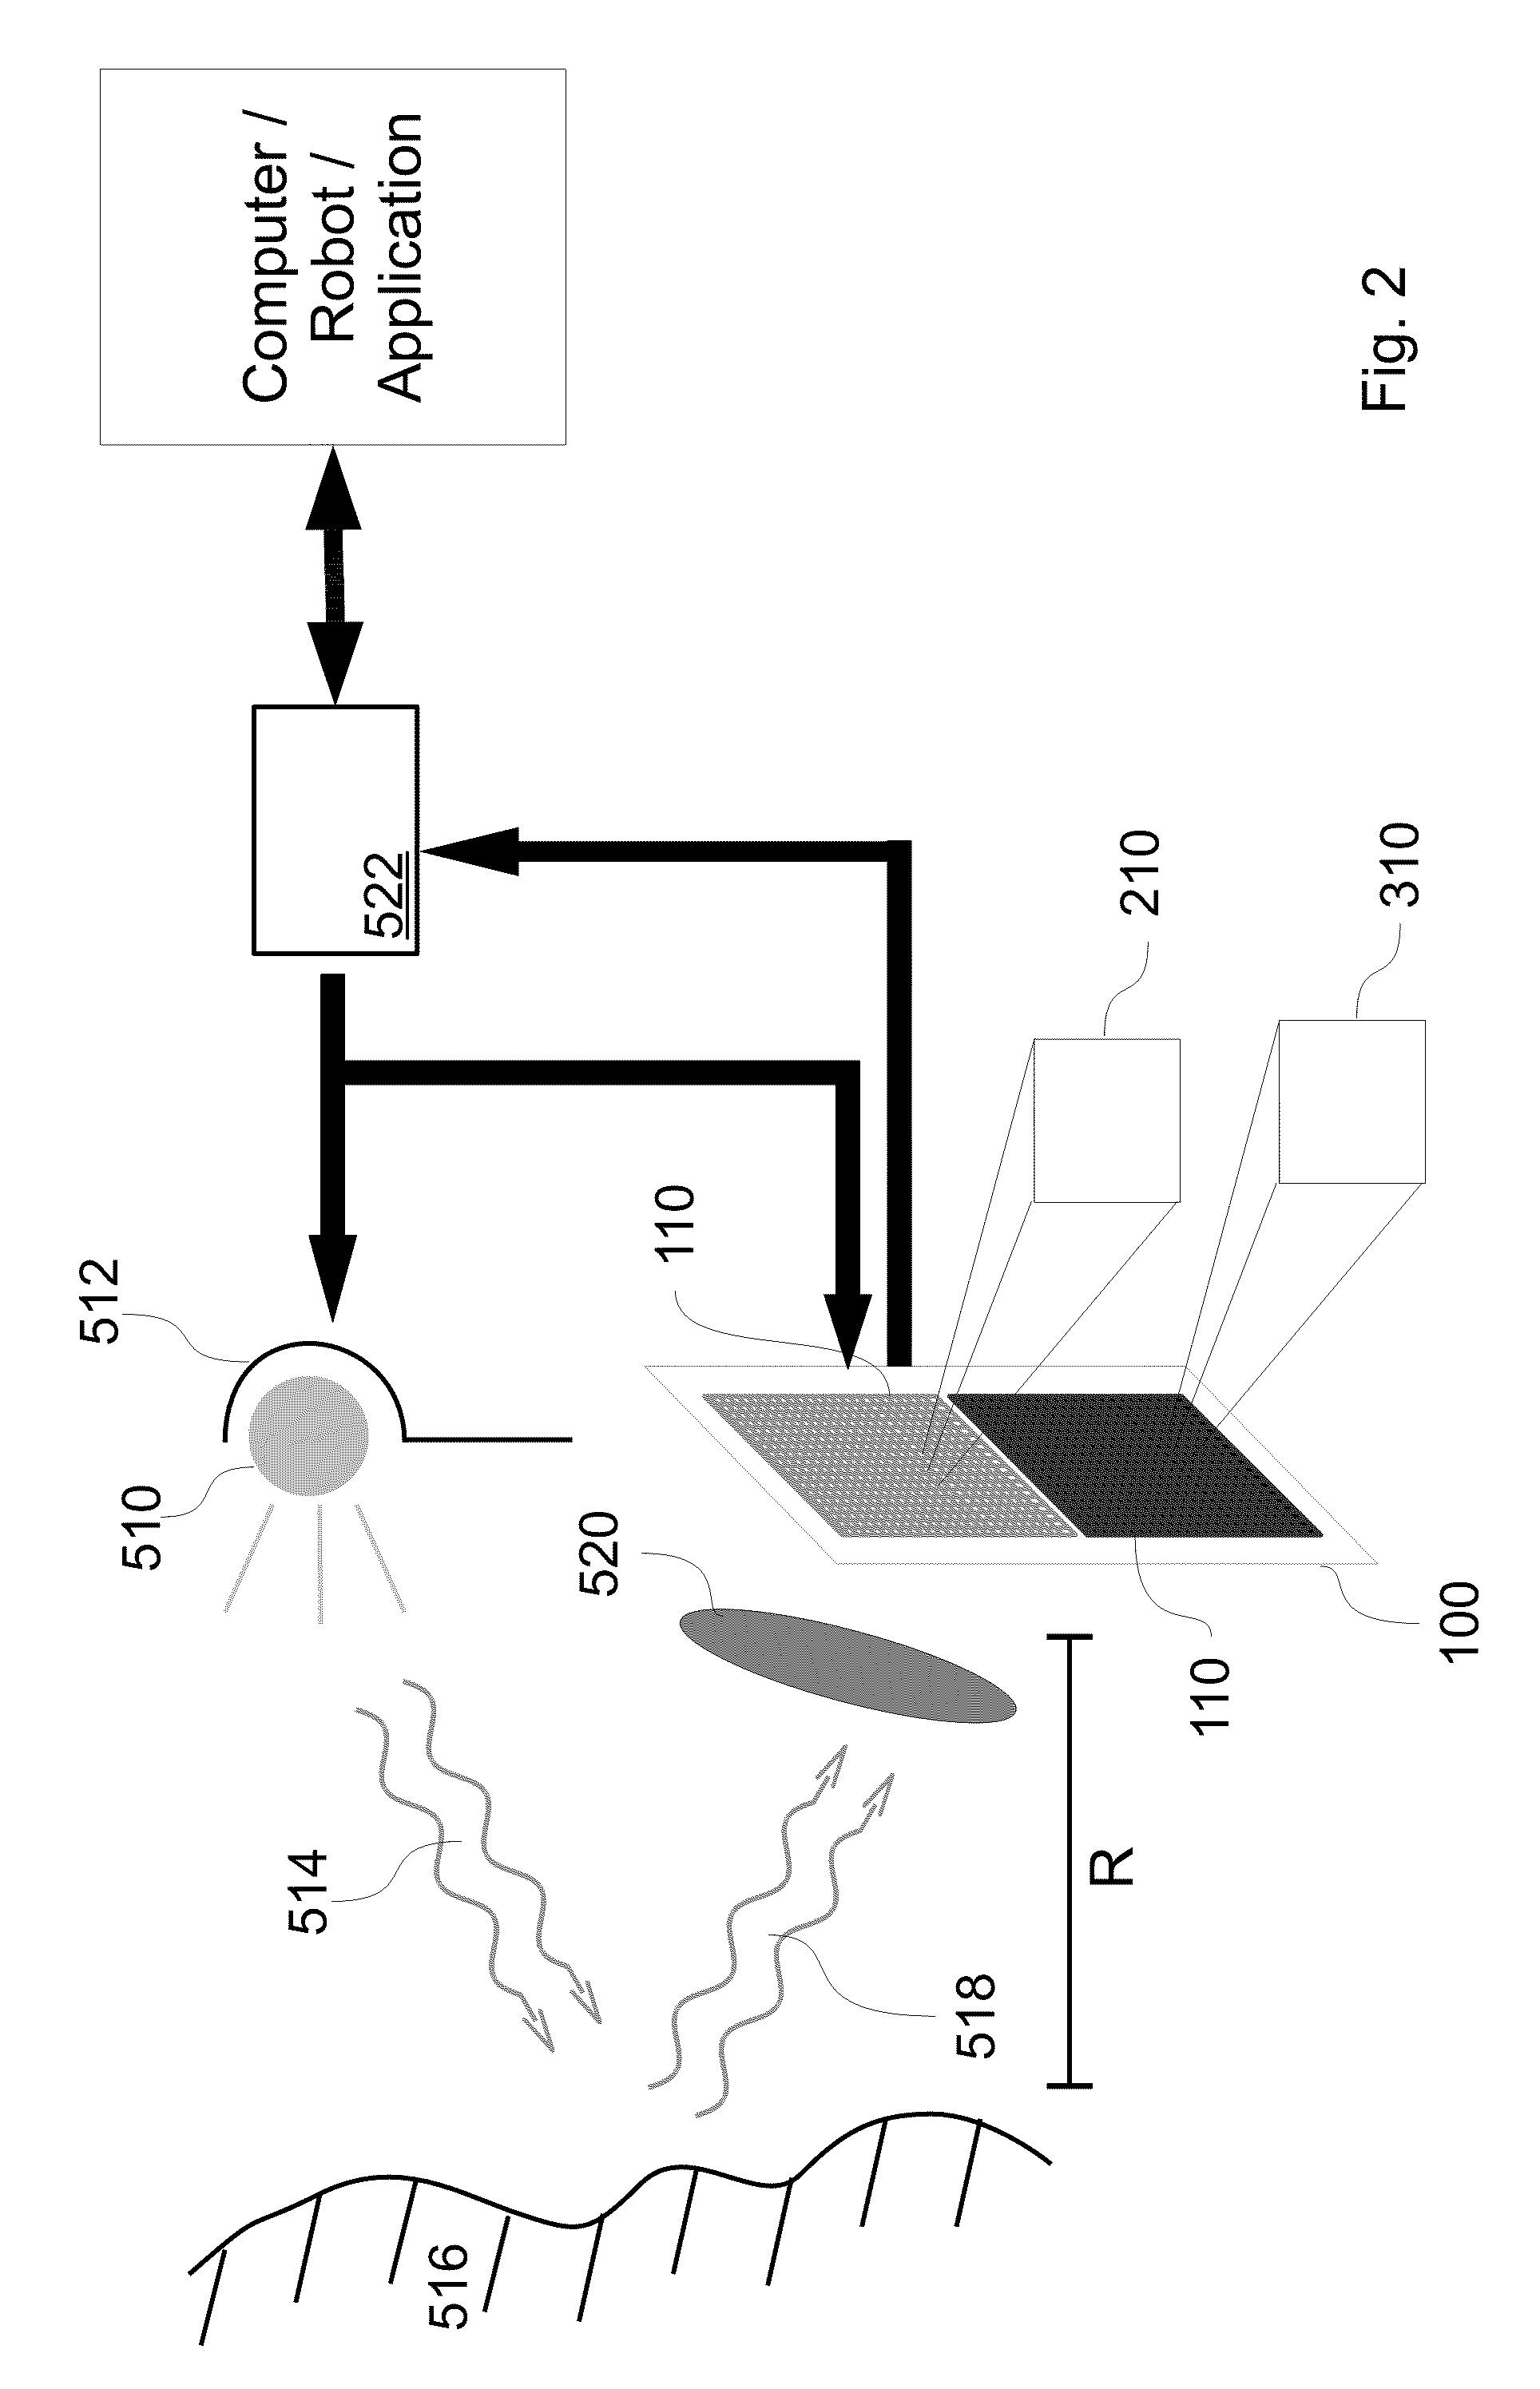 Demodulation sensor with separate pixel and storage arrays